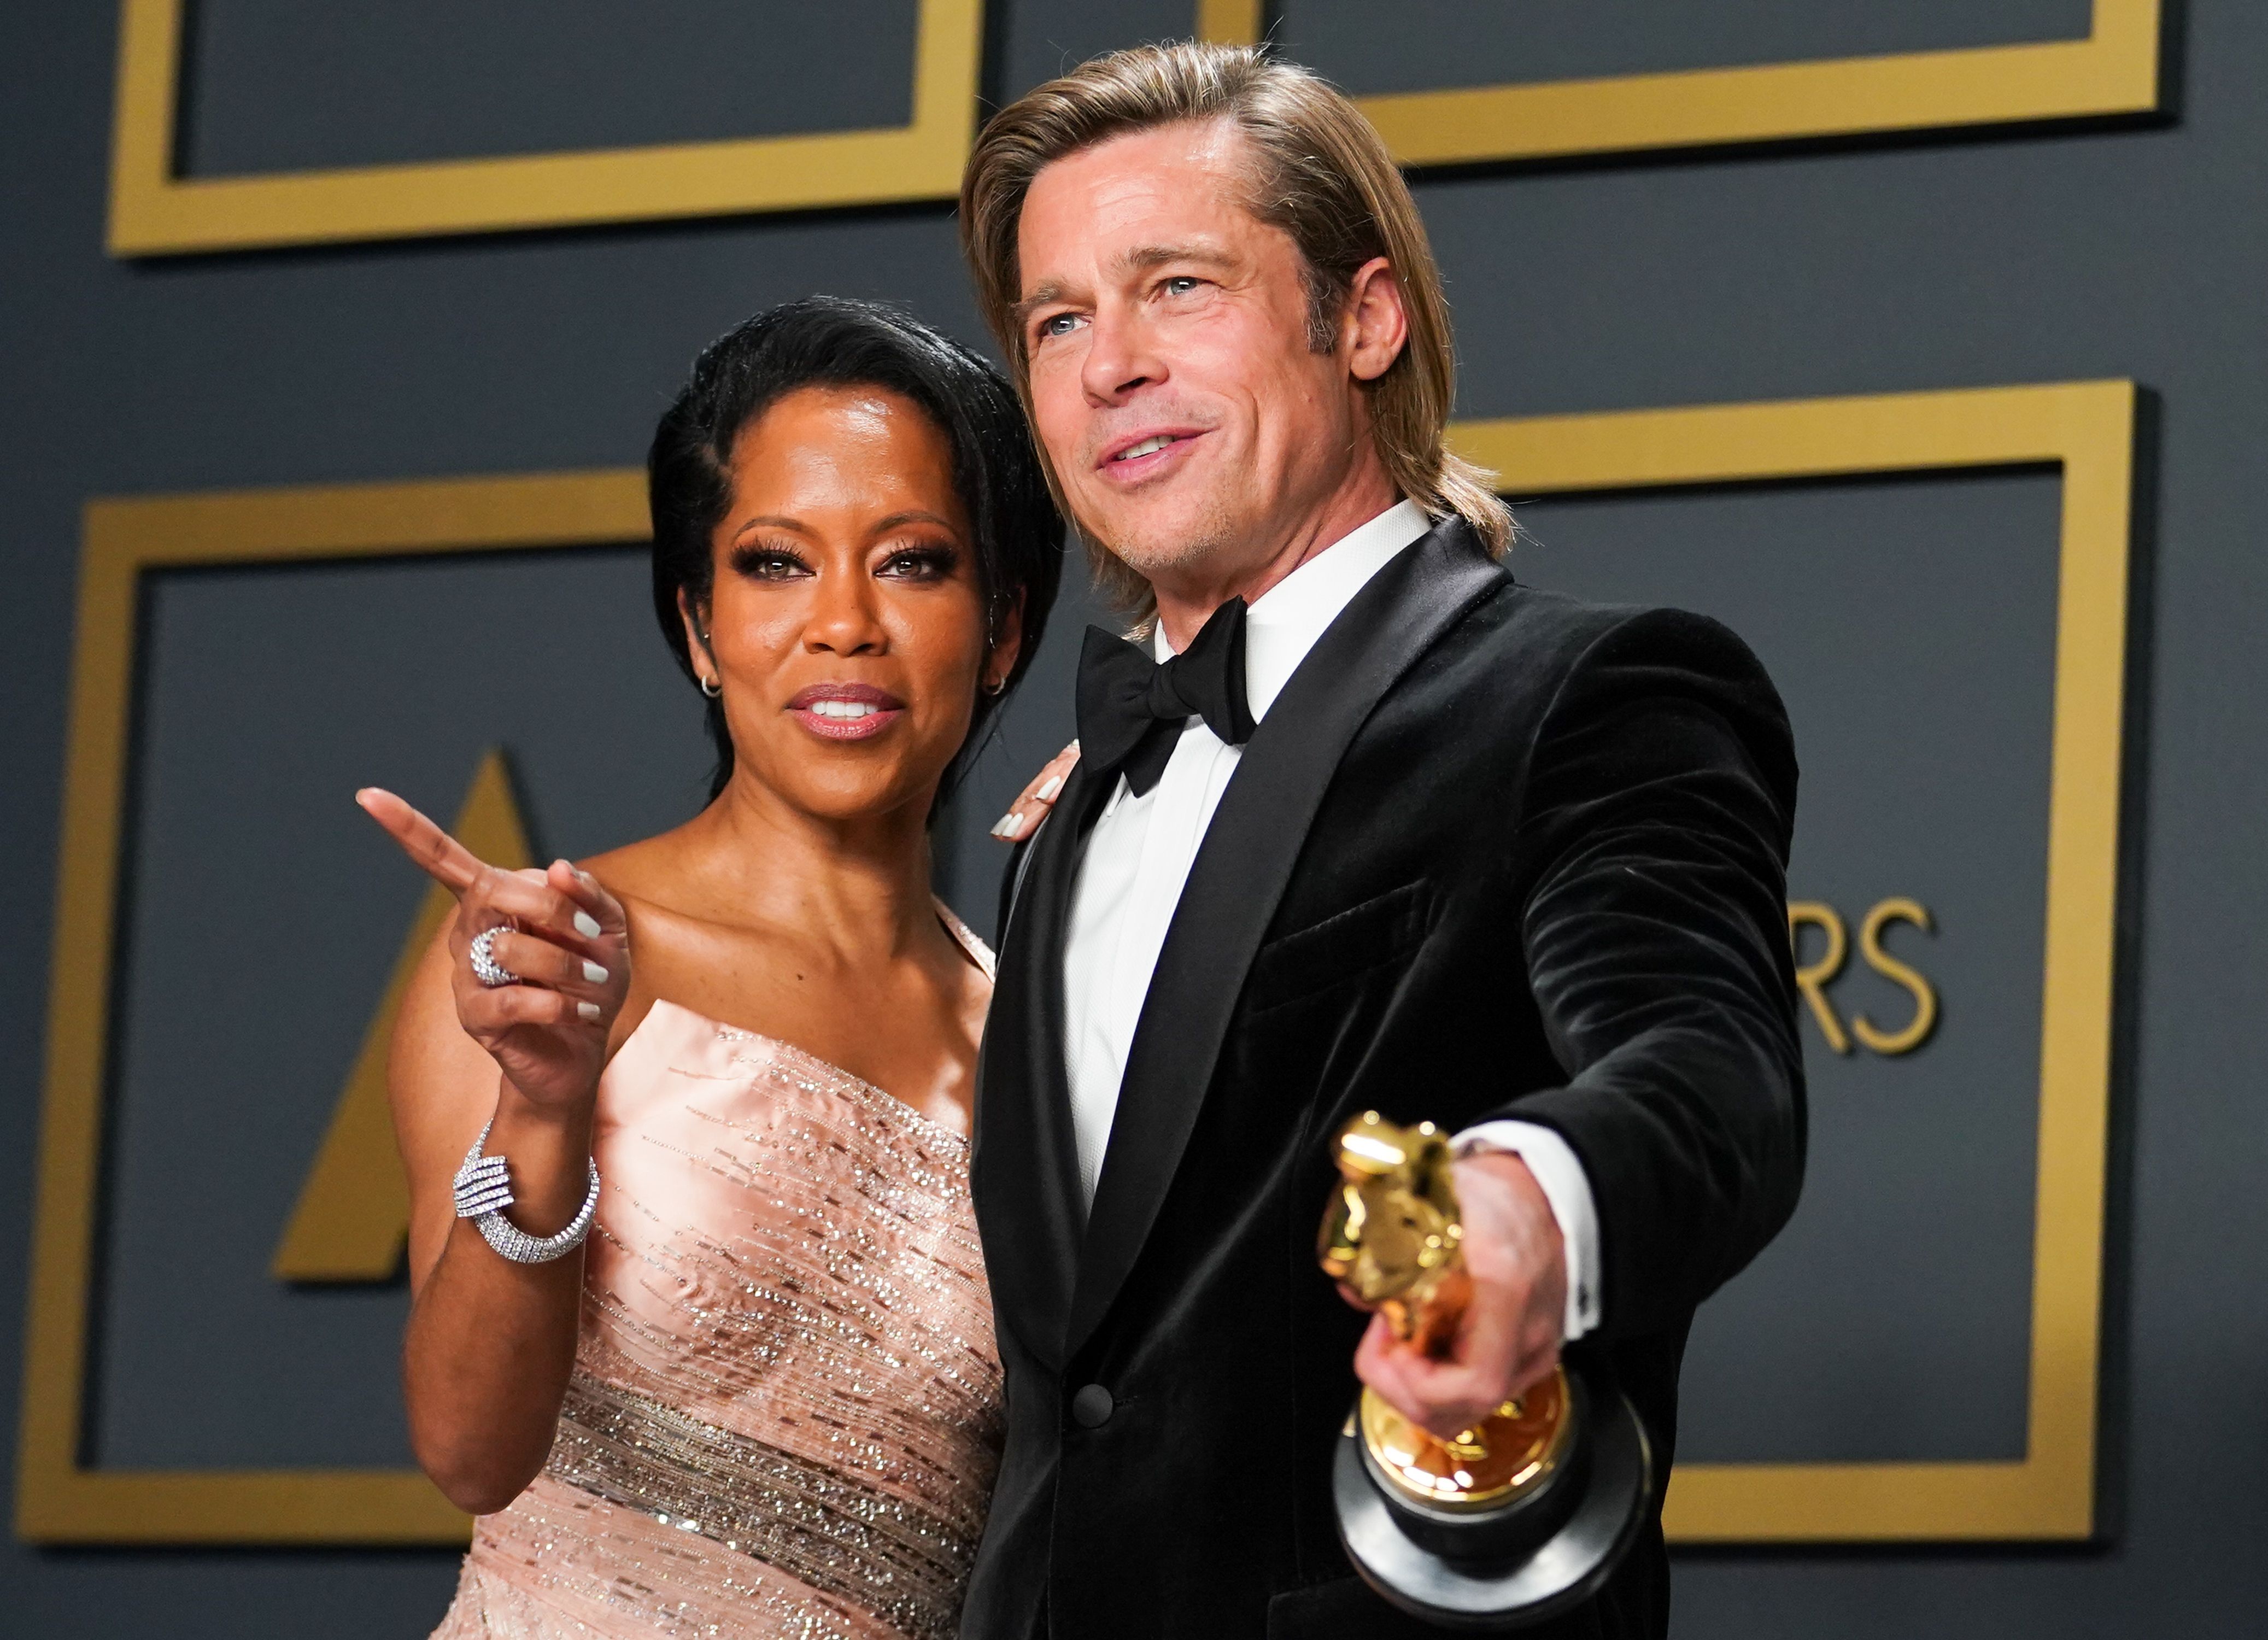 See Pictures of Brad Pitt and Regina King at the 2020 Oscars